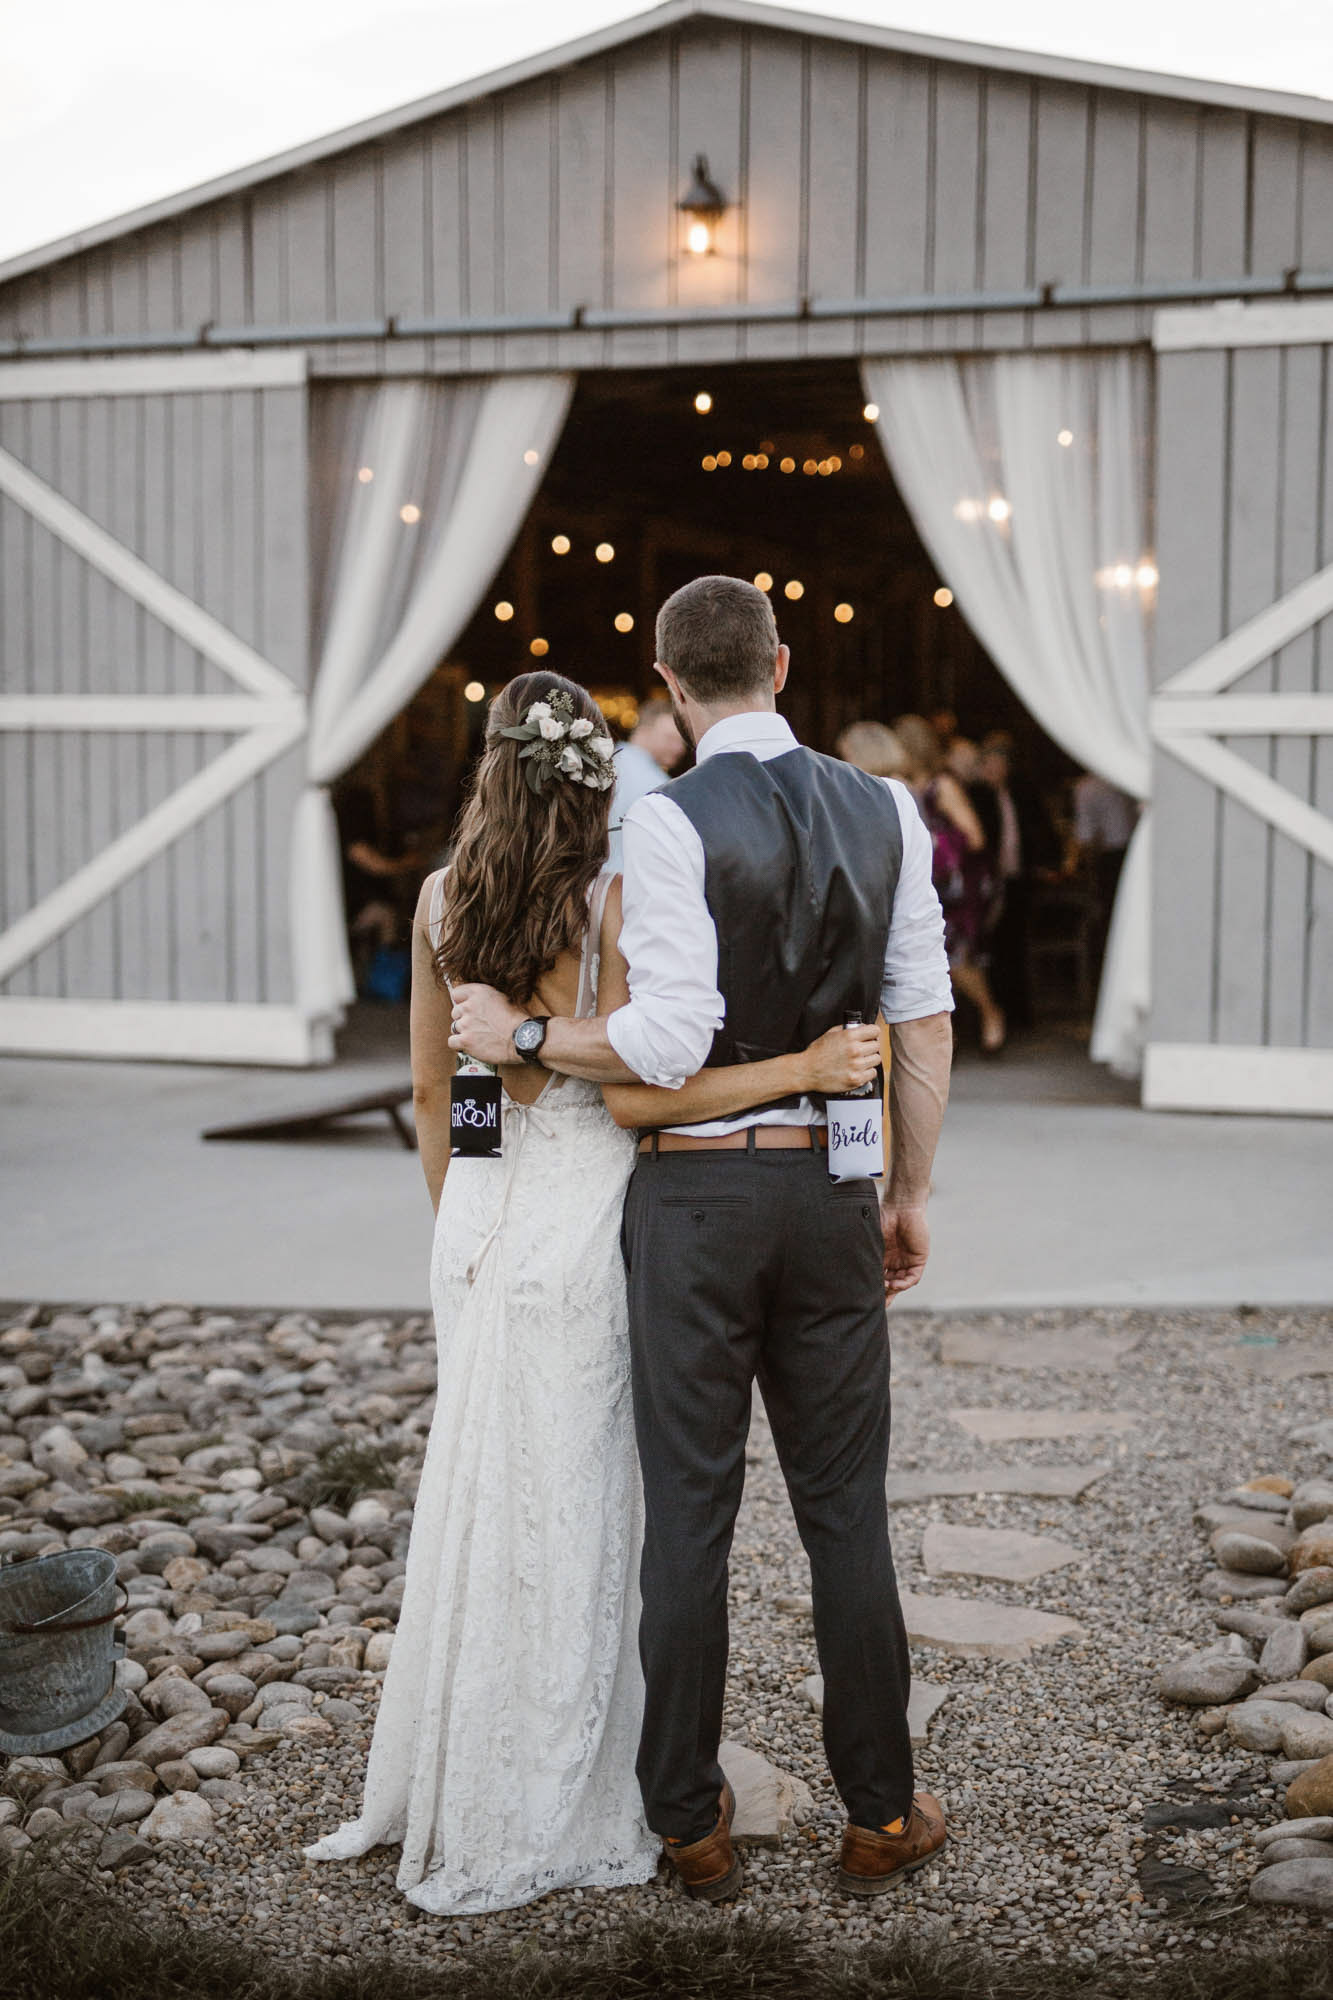 a wedding couple standing facing a barn holding a bride and a groom labeled bottles